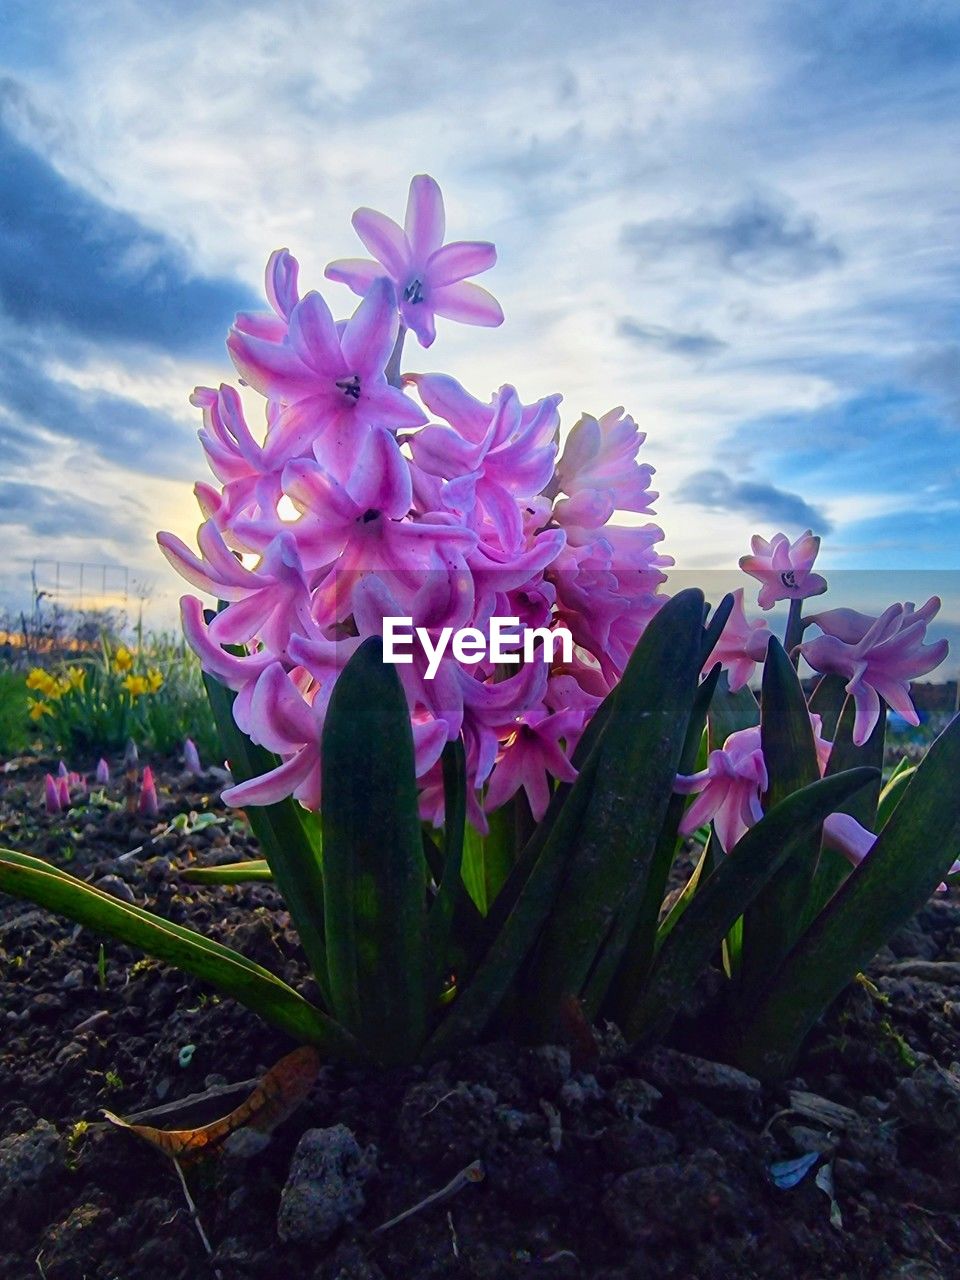 flower, flowering plant, plant, beauty in nature, freshness, nature, sky, cloud, growth, purple, fragility, petal, pink, blossom, flower head, close-up, inflorescence, no people, springtime, land, outdoors, field, landscape, environment, wildflower, day, tranquility, plant part, botany